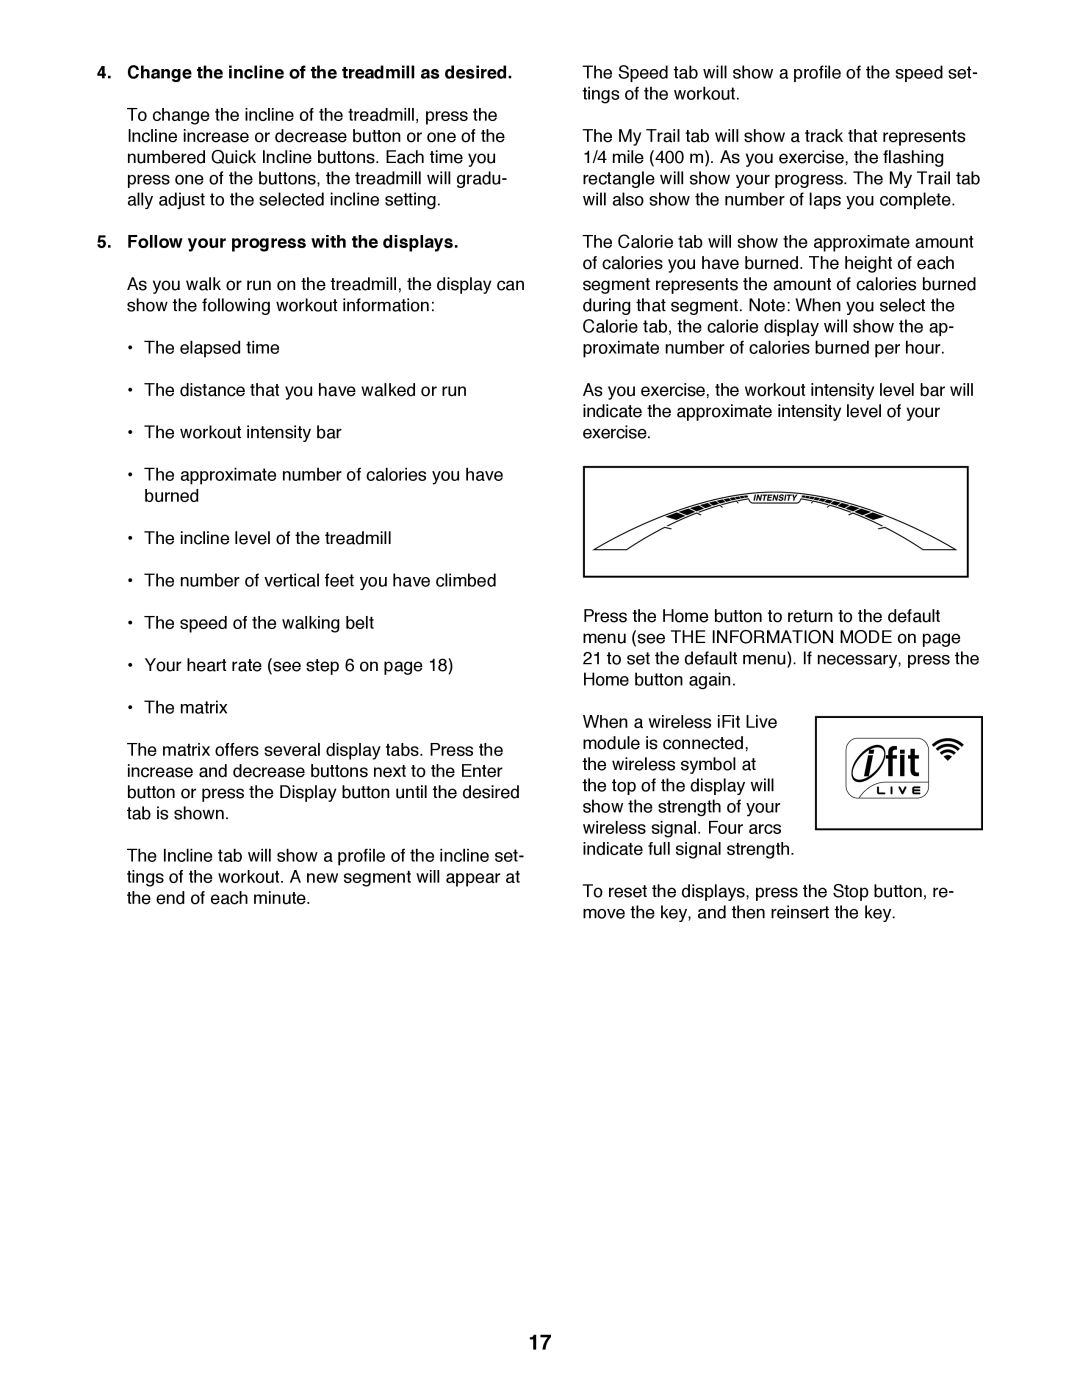 Sears NTL61011.1 user manual Change the incline of the treadmill as desired, Follow your progress with the displays 